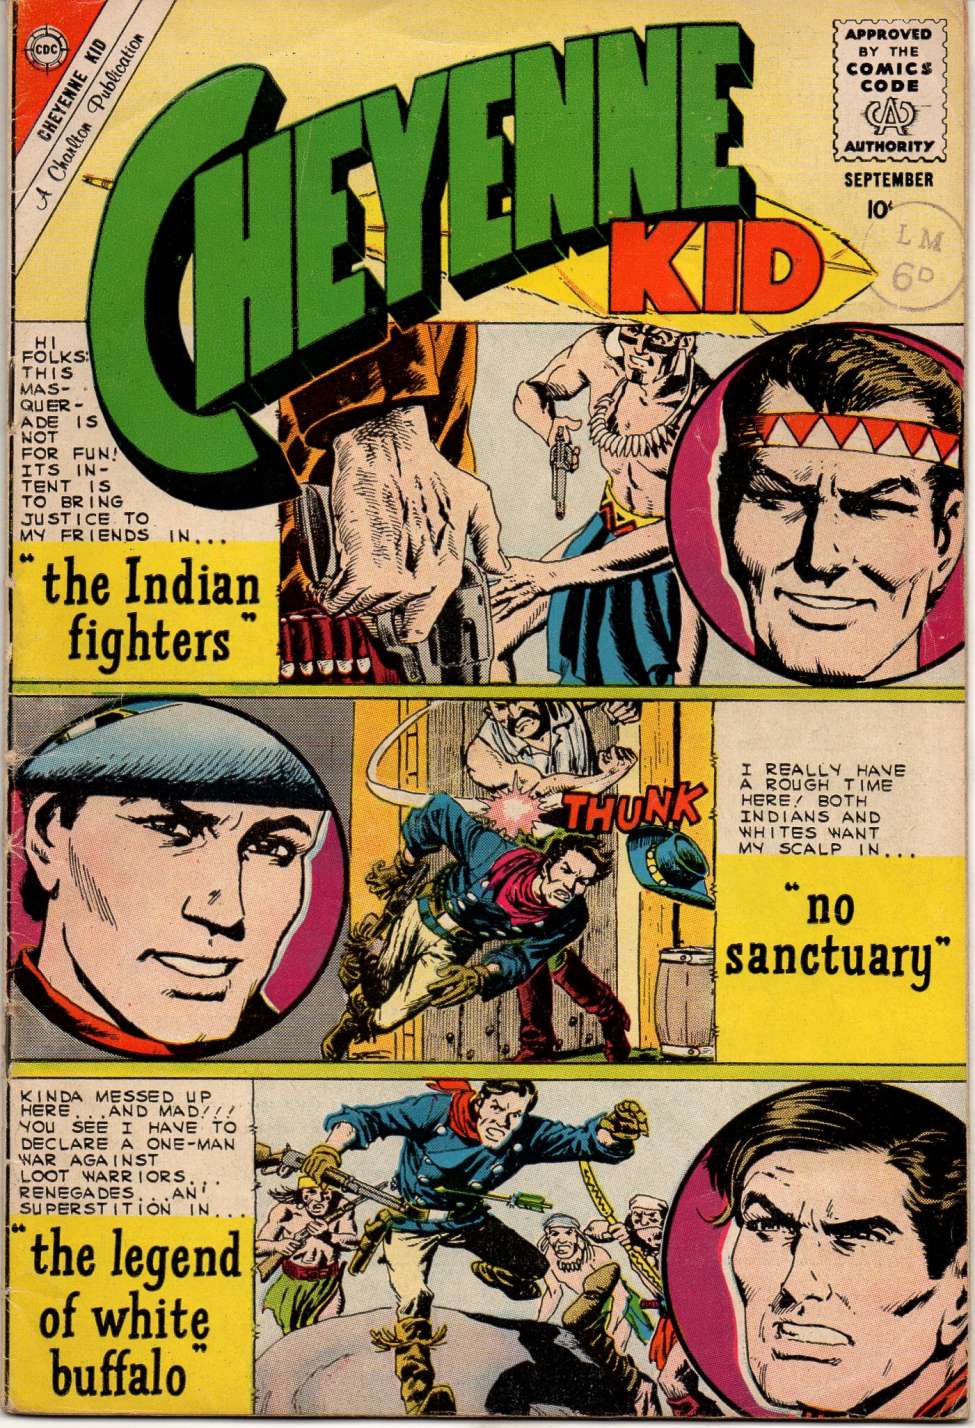 Book Cover For Cheyenne Kid 24